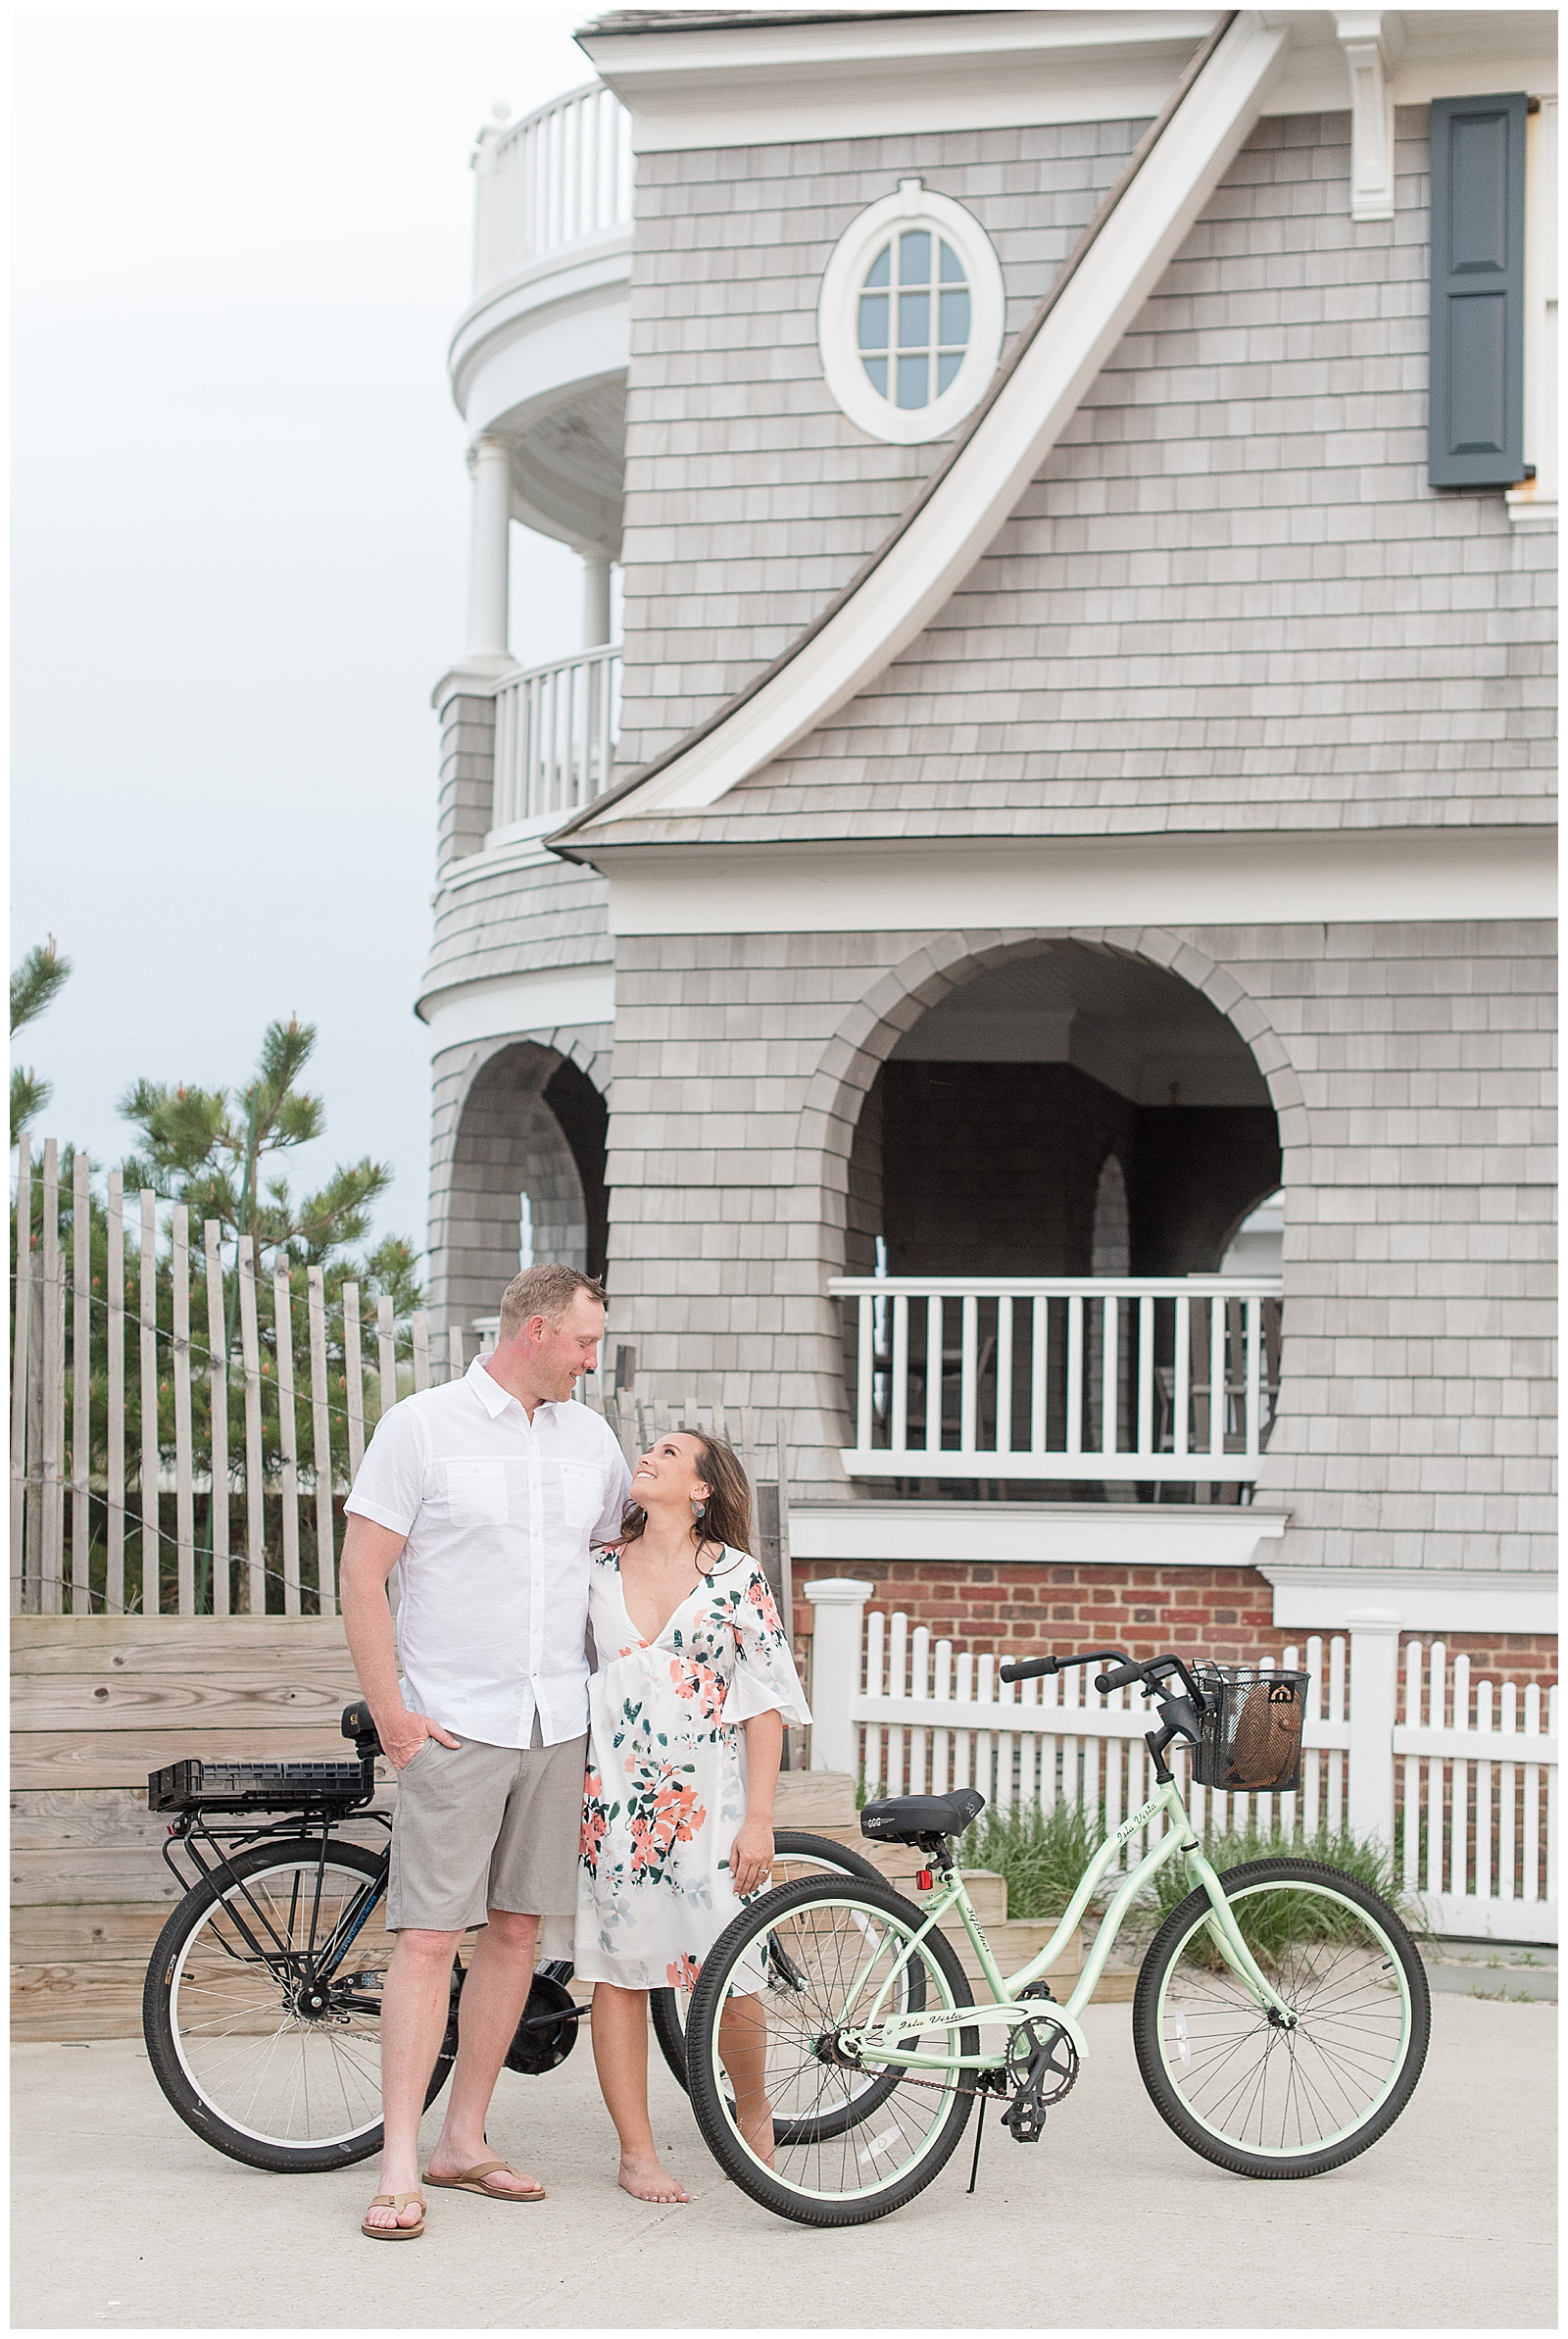 engaged couple hugging and looking at each other smiling beside two bikes along sidewalk by beach house in new jersey